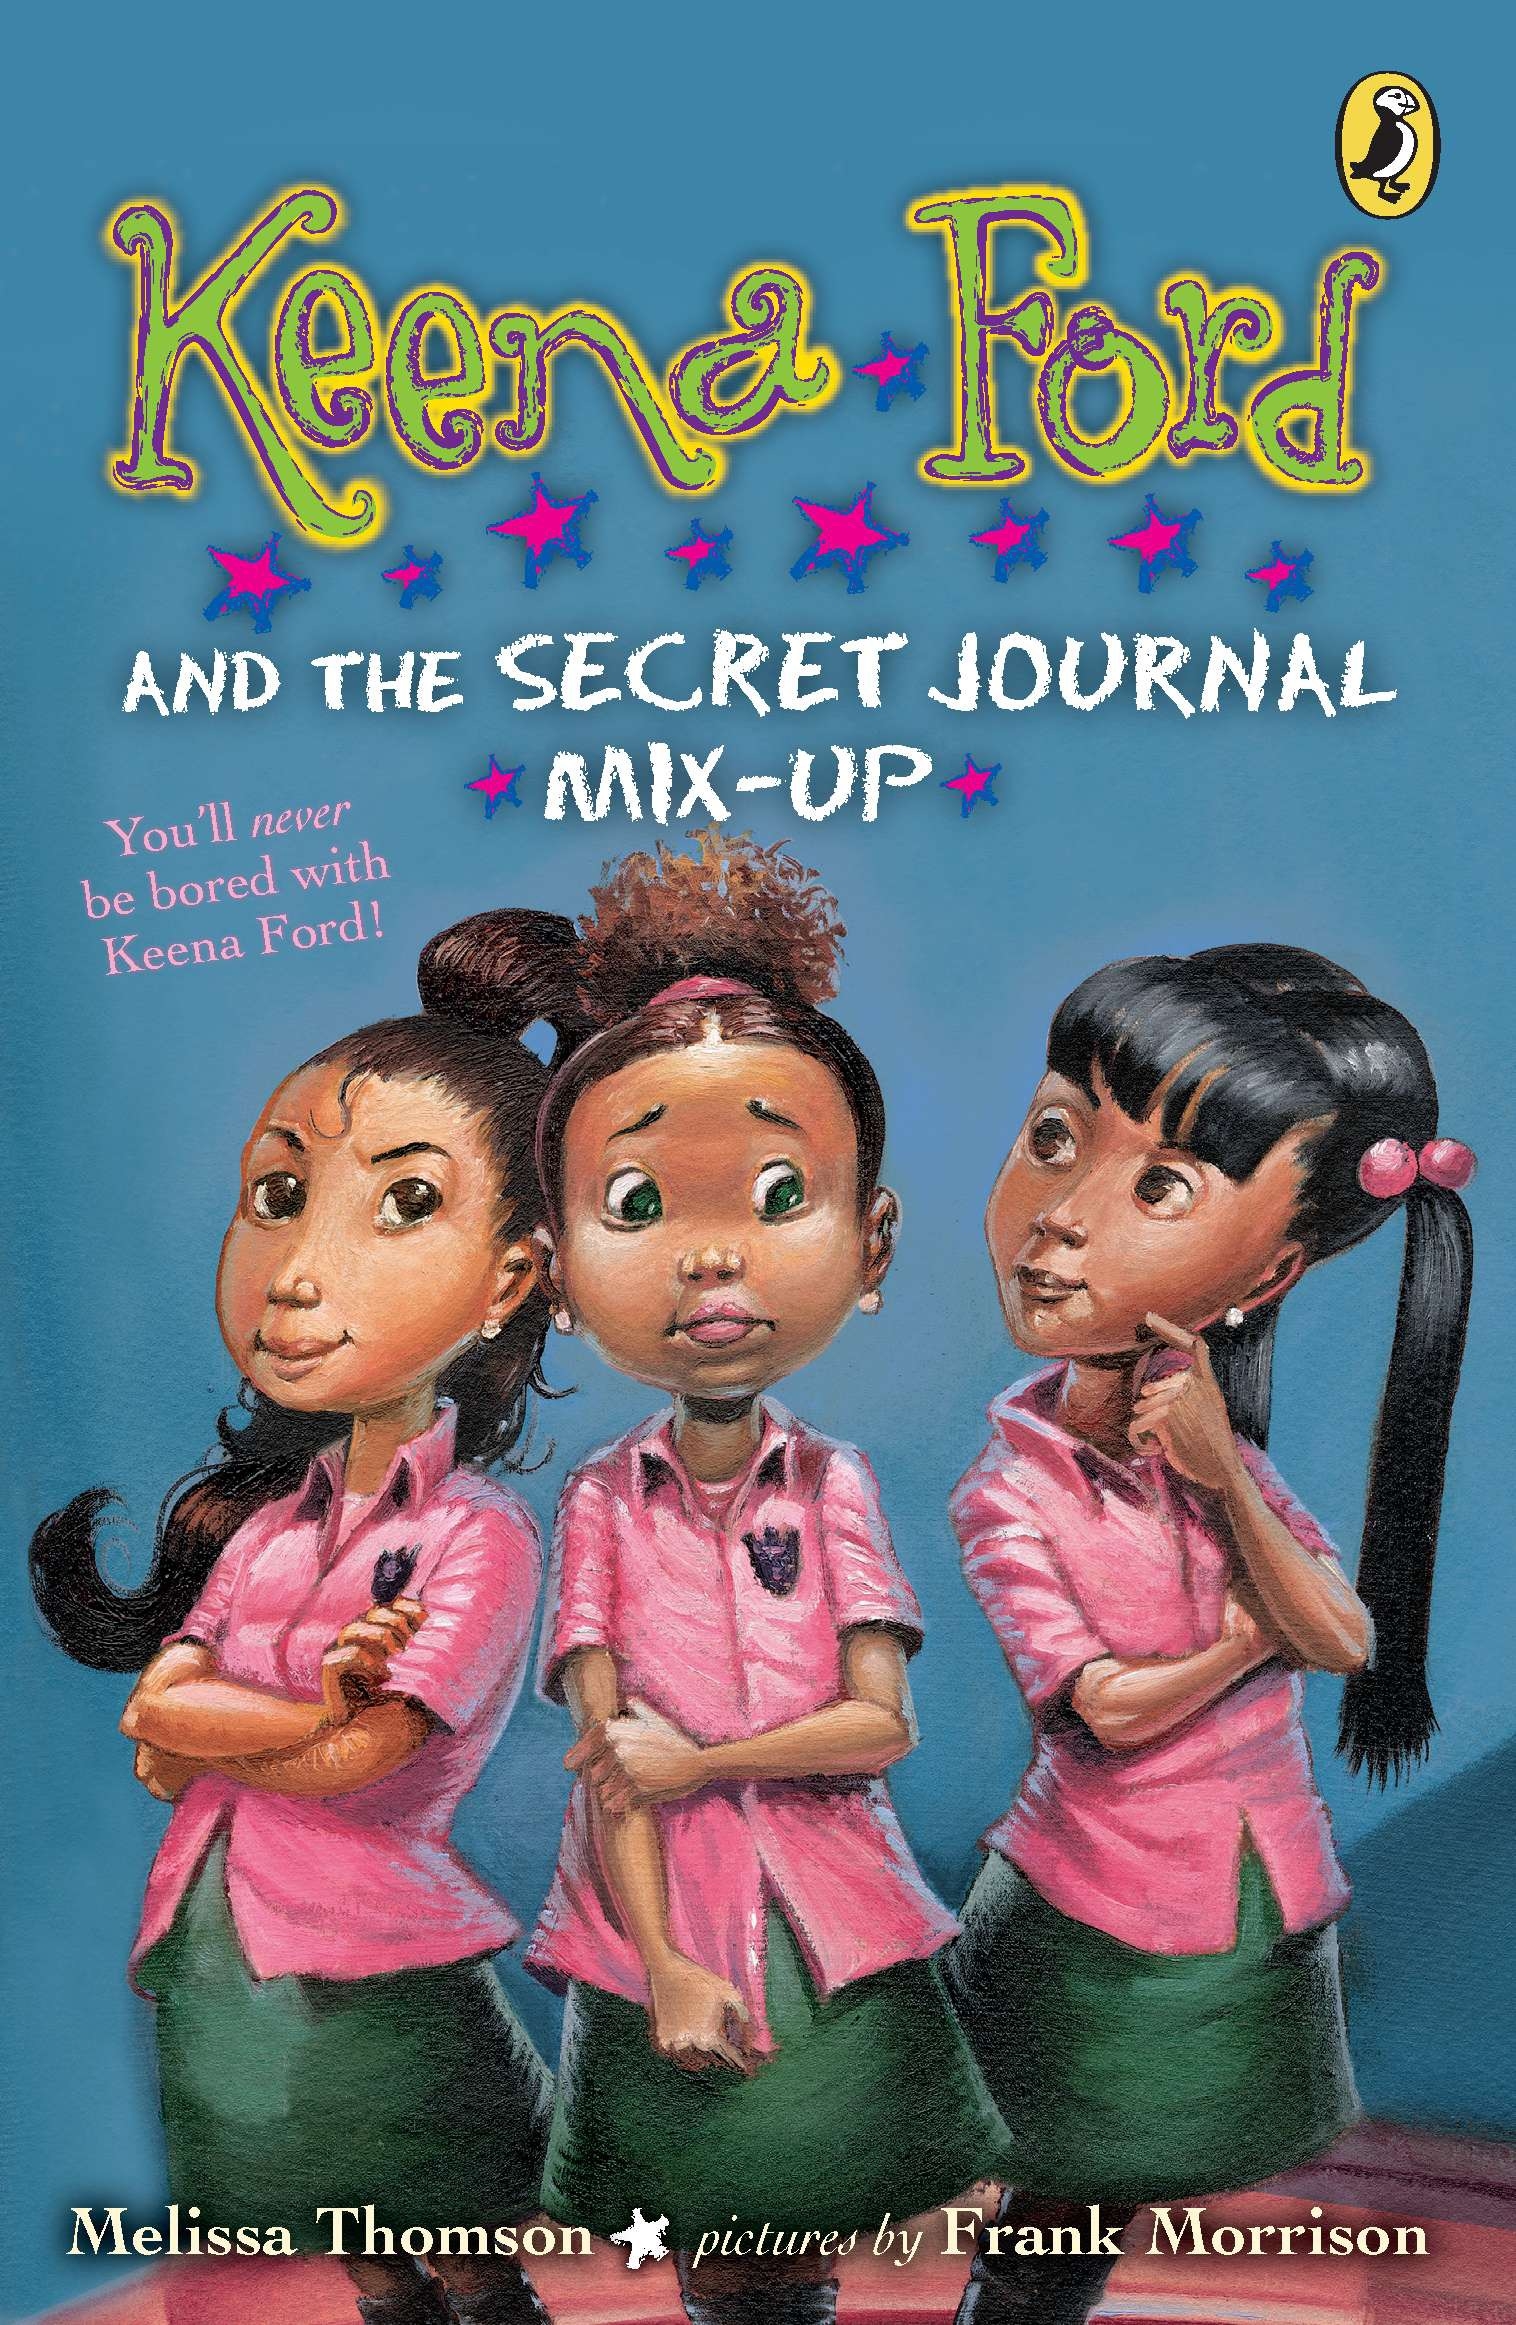 Keena Ford and the Secret Journal Mix-Up by Melissa Thomson - Penguin ...